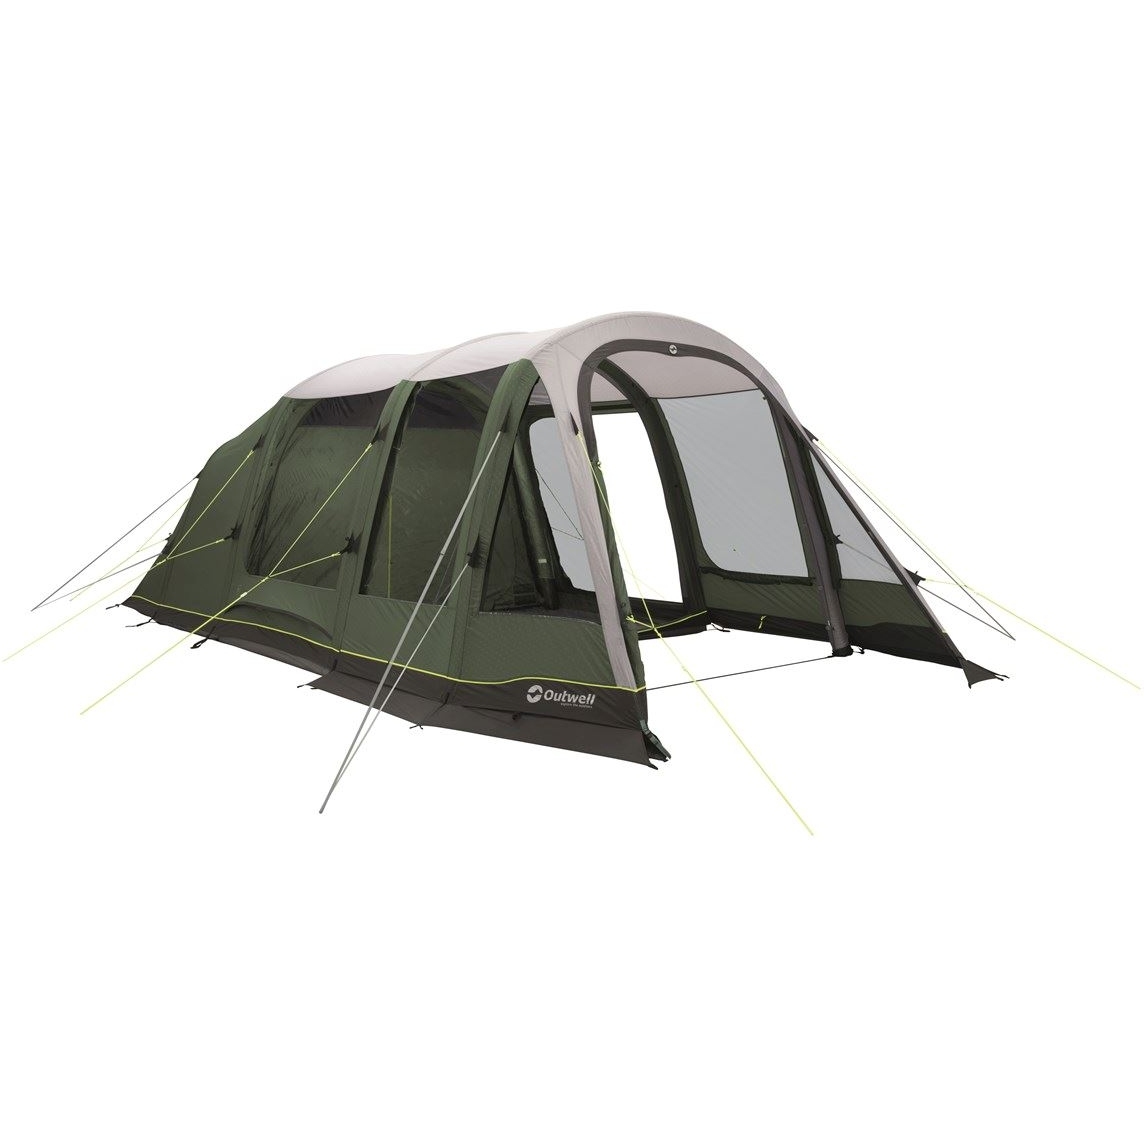 Productfoto van Outwell Parkdale 4PA Tent - Green